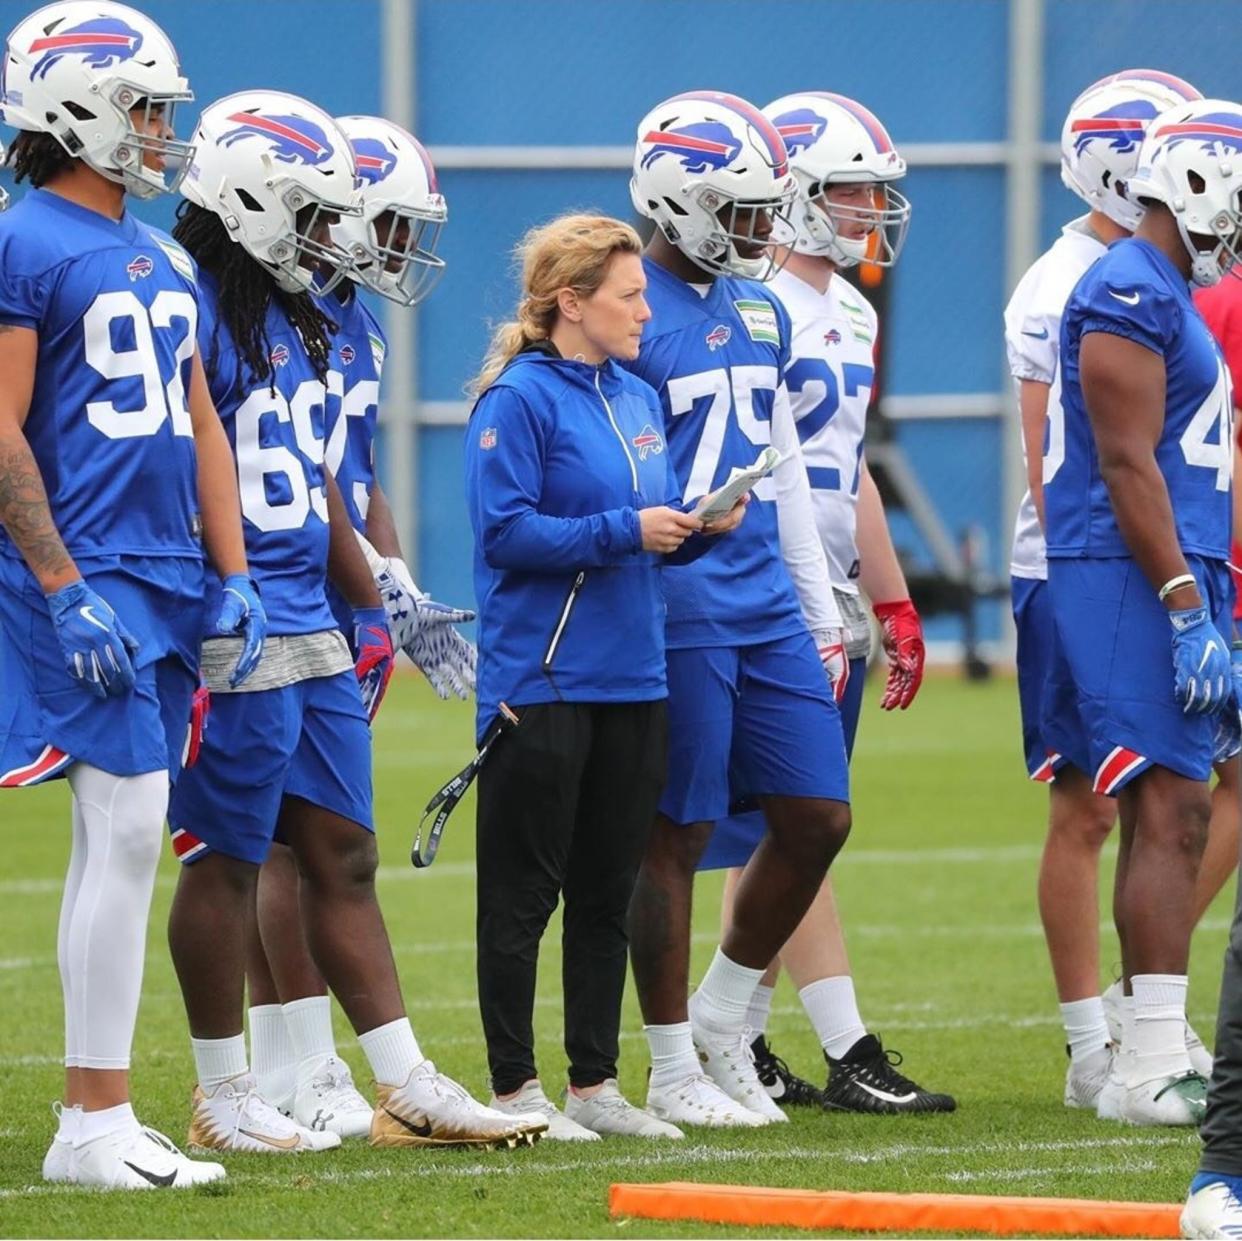 Phoebe Schecter putting the NFL side Buffalo Bills through their paces. (c) Phoebe Schecter/Instagram 